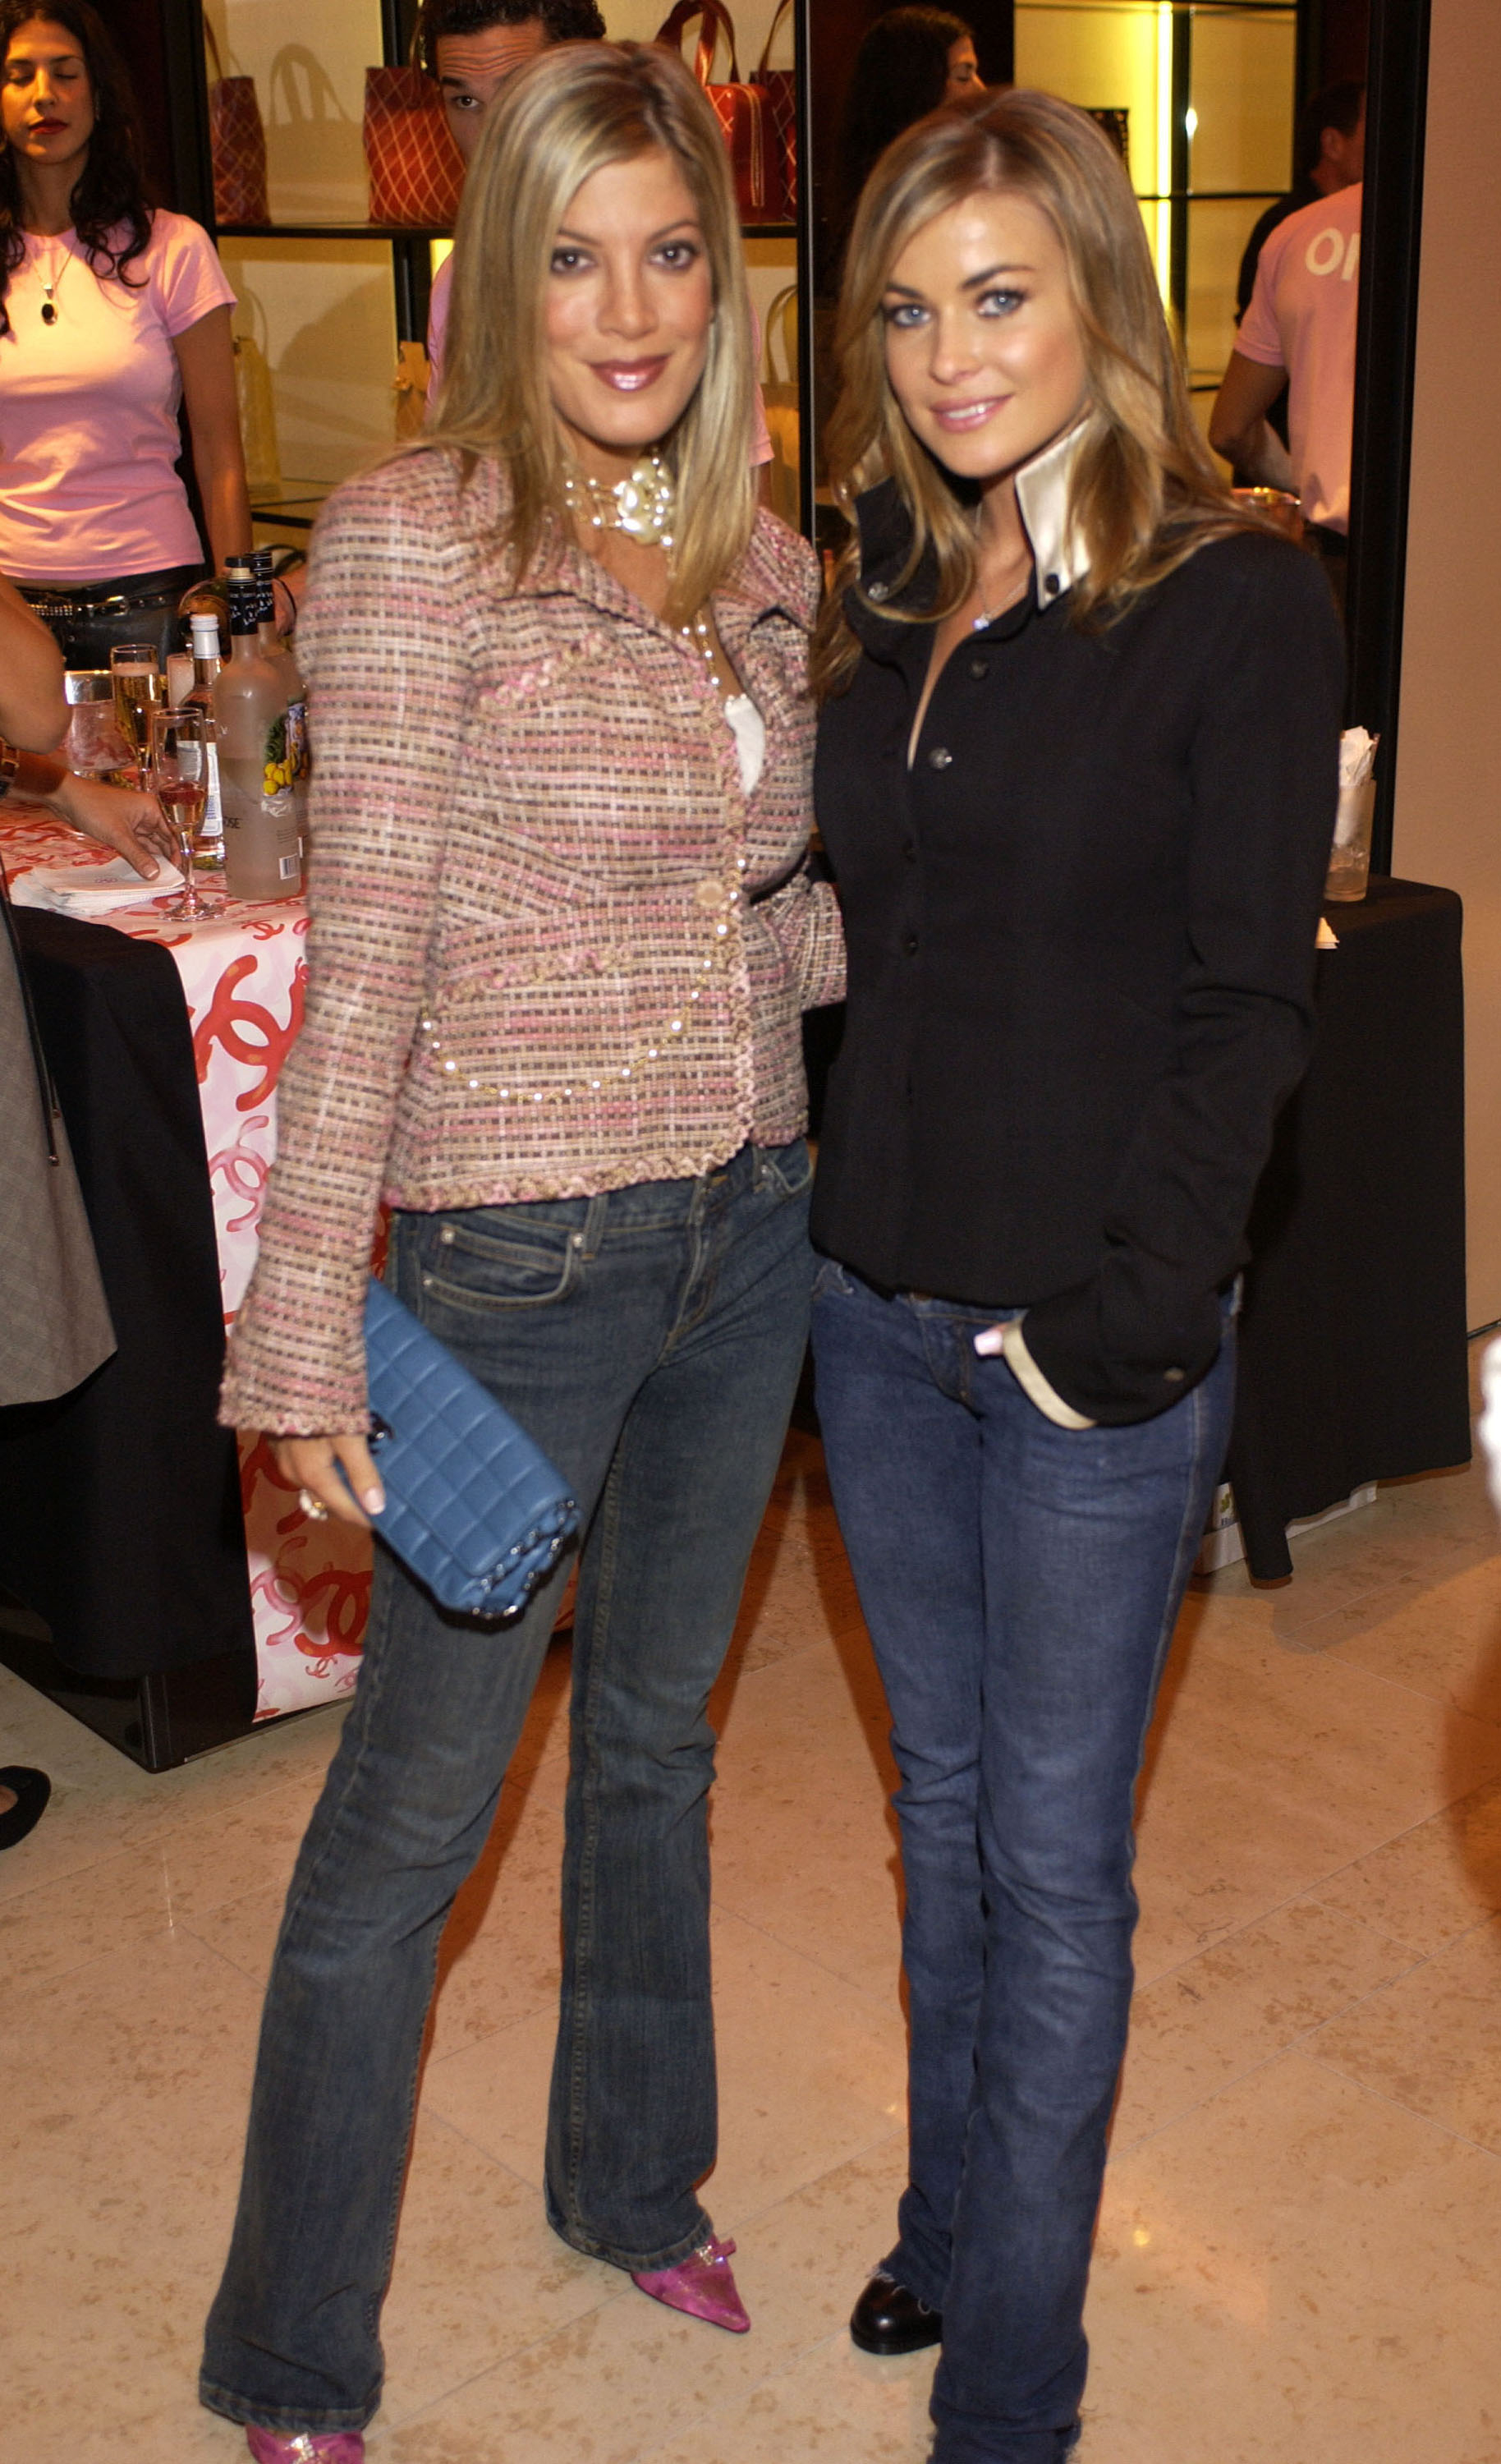 Tori Spelling and Carmen Electra posing together at an event, both wearing jeans and jackets. Tori holds a clutch